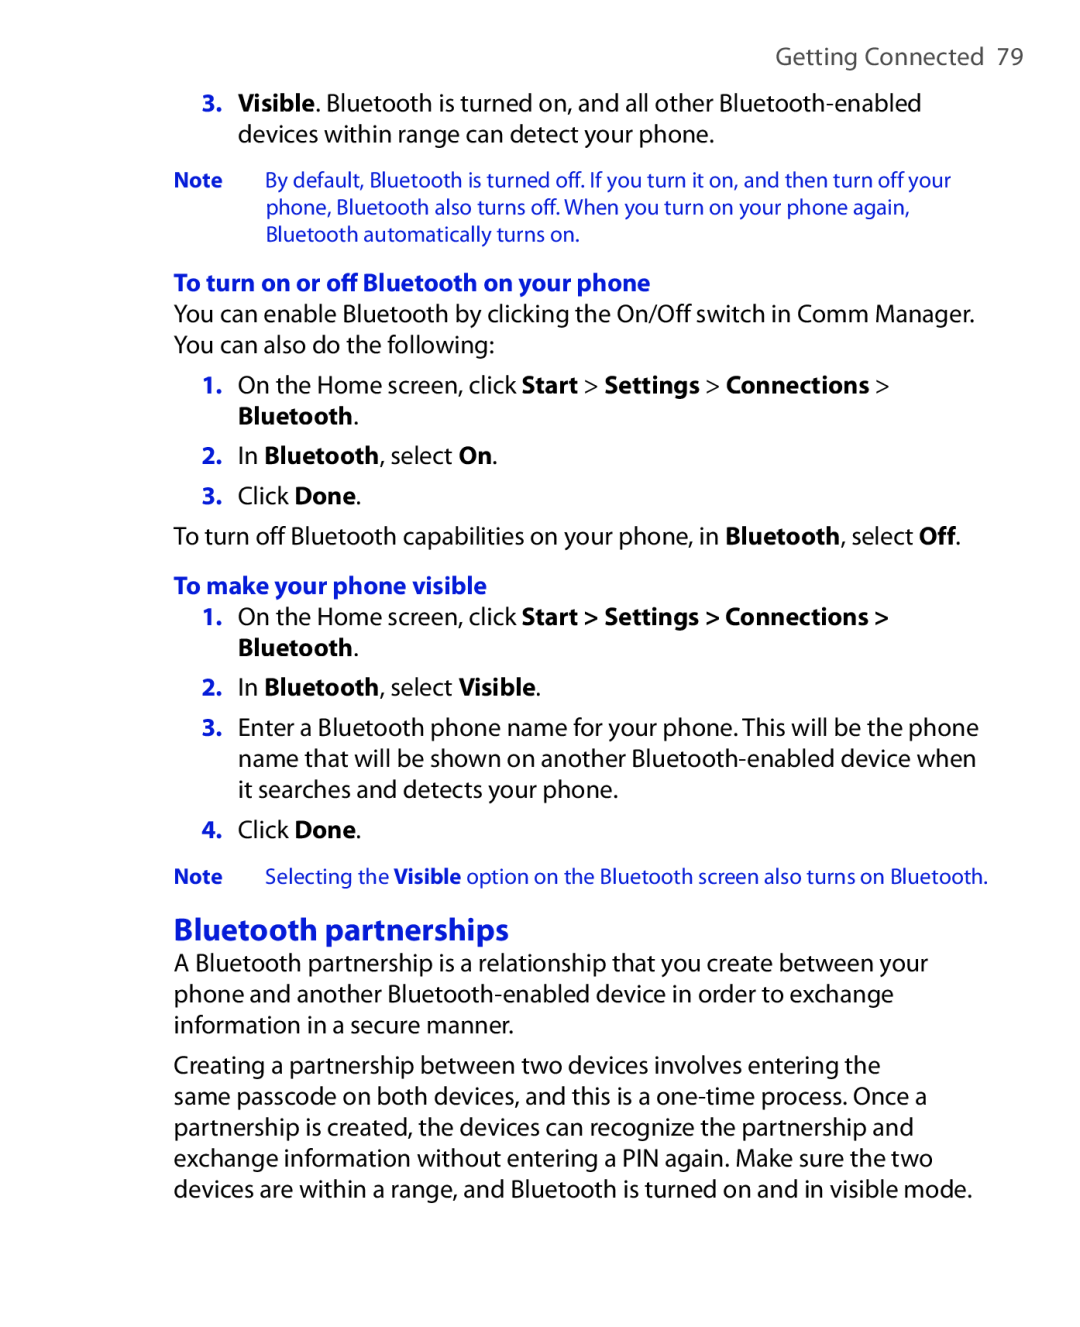 HTC HTC S621 user manual Bluetooth partnerships, Getting Connected, To turn on or oﬀ Bluetooth on your phone 